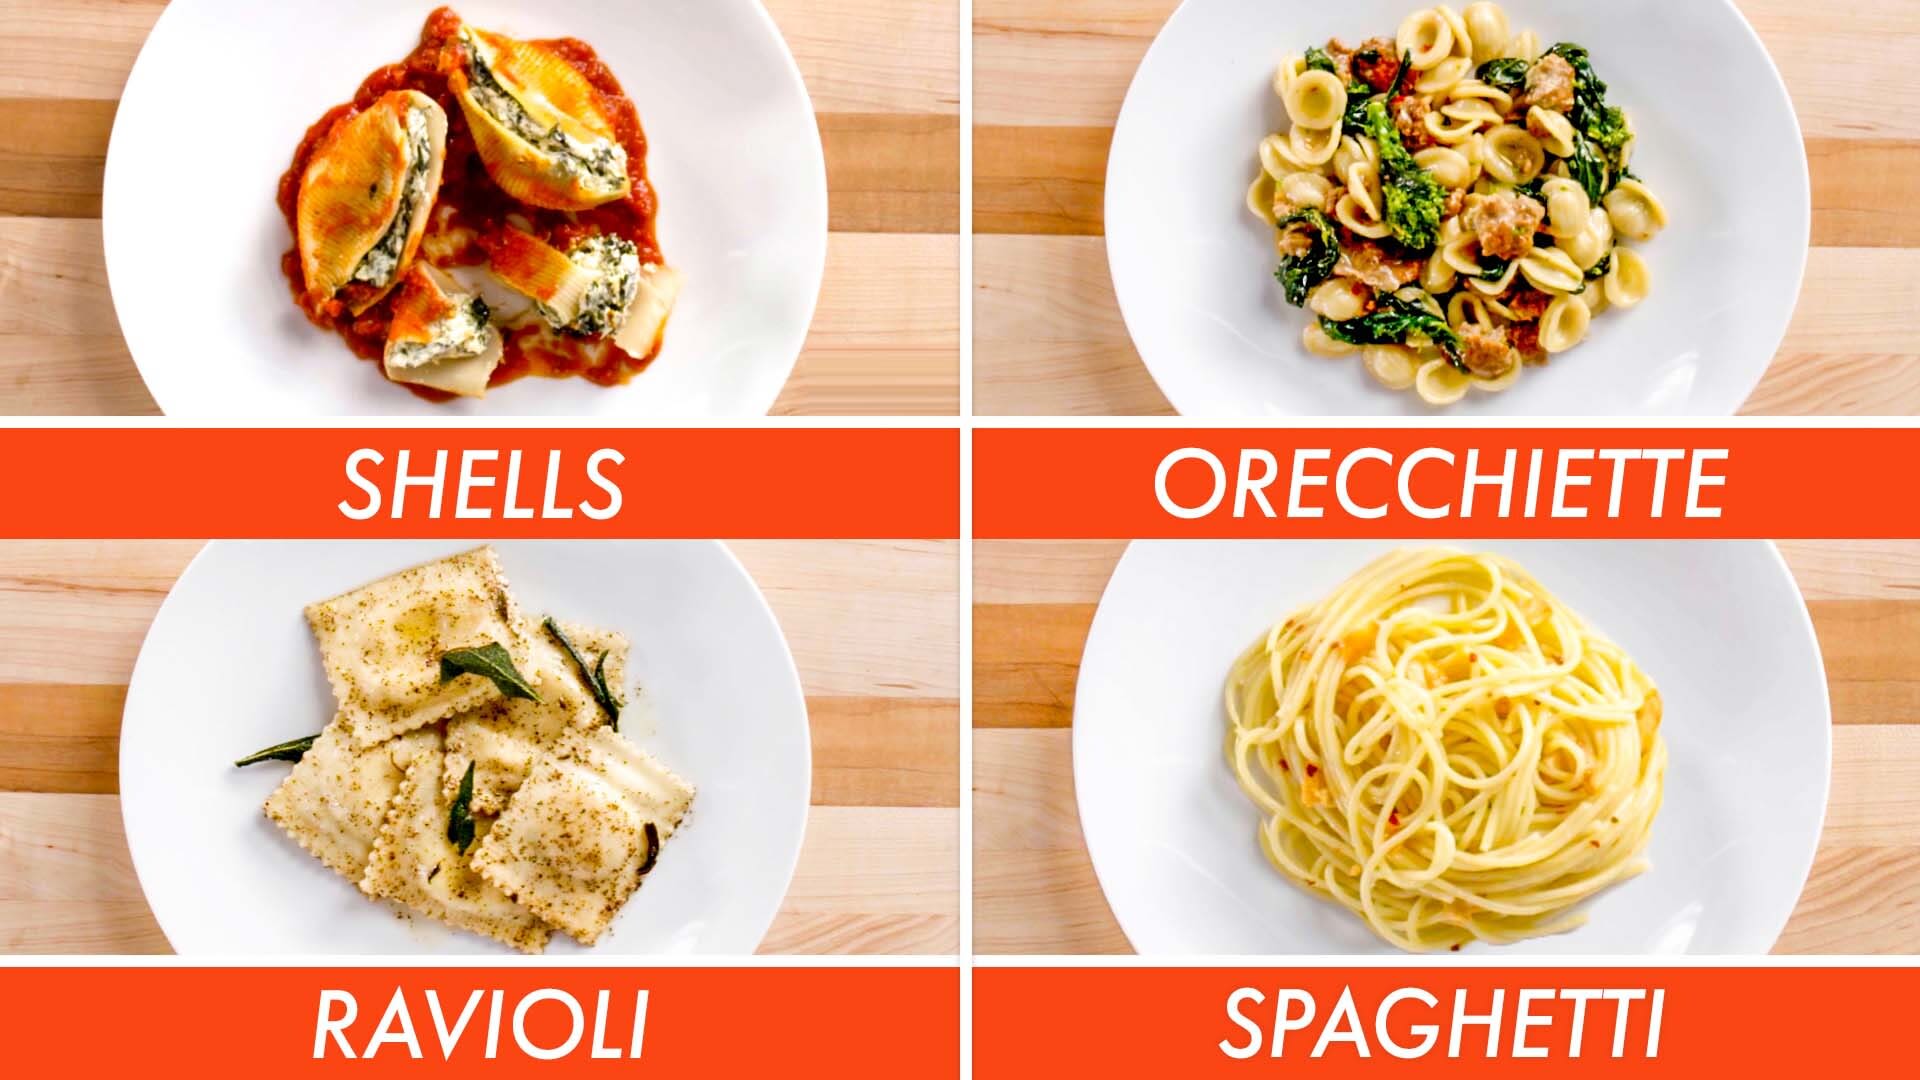 Watch Picking The Right Pasta For Every Sauce | The Big Guide | Epicurious